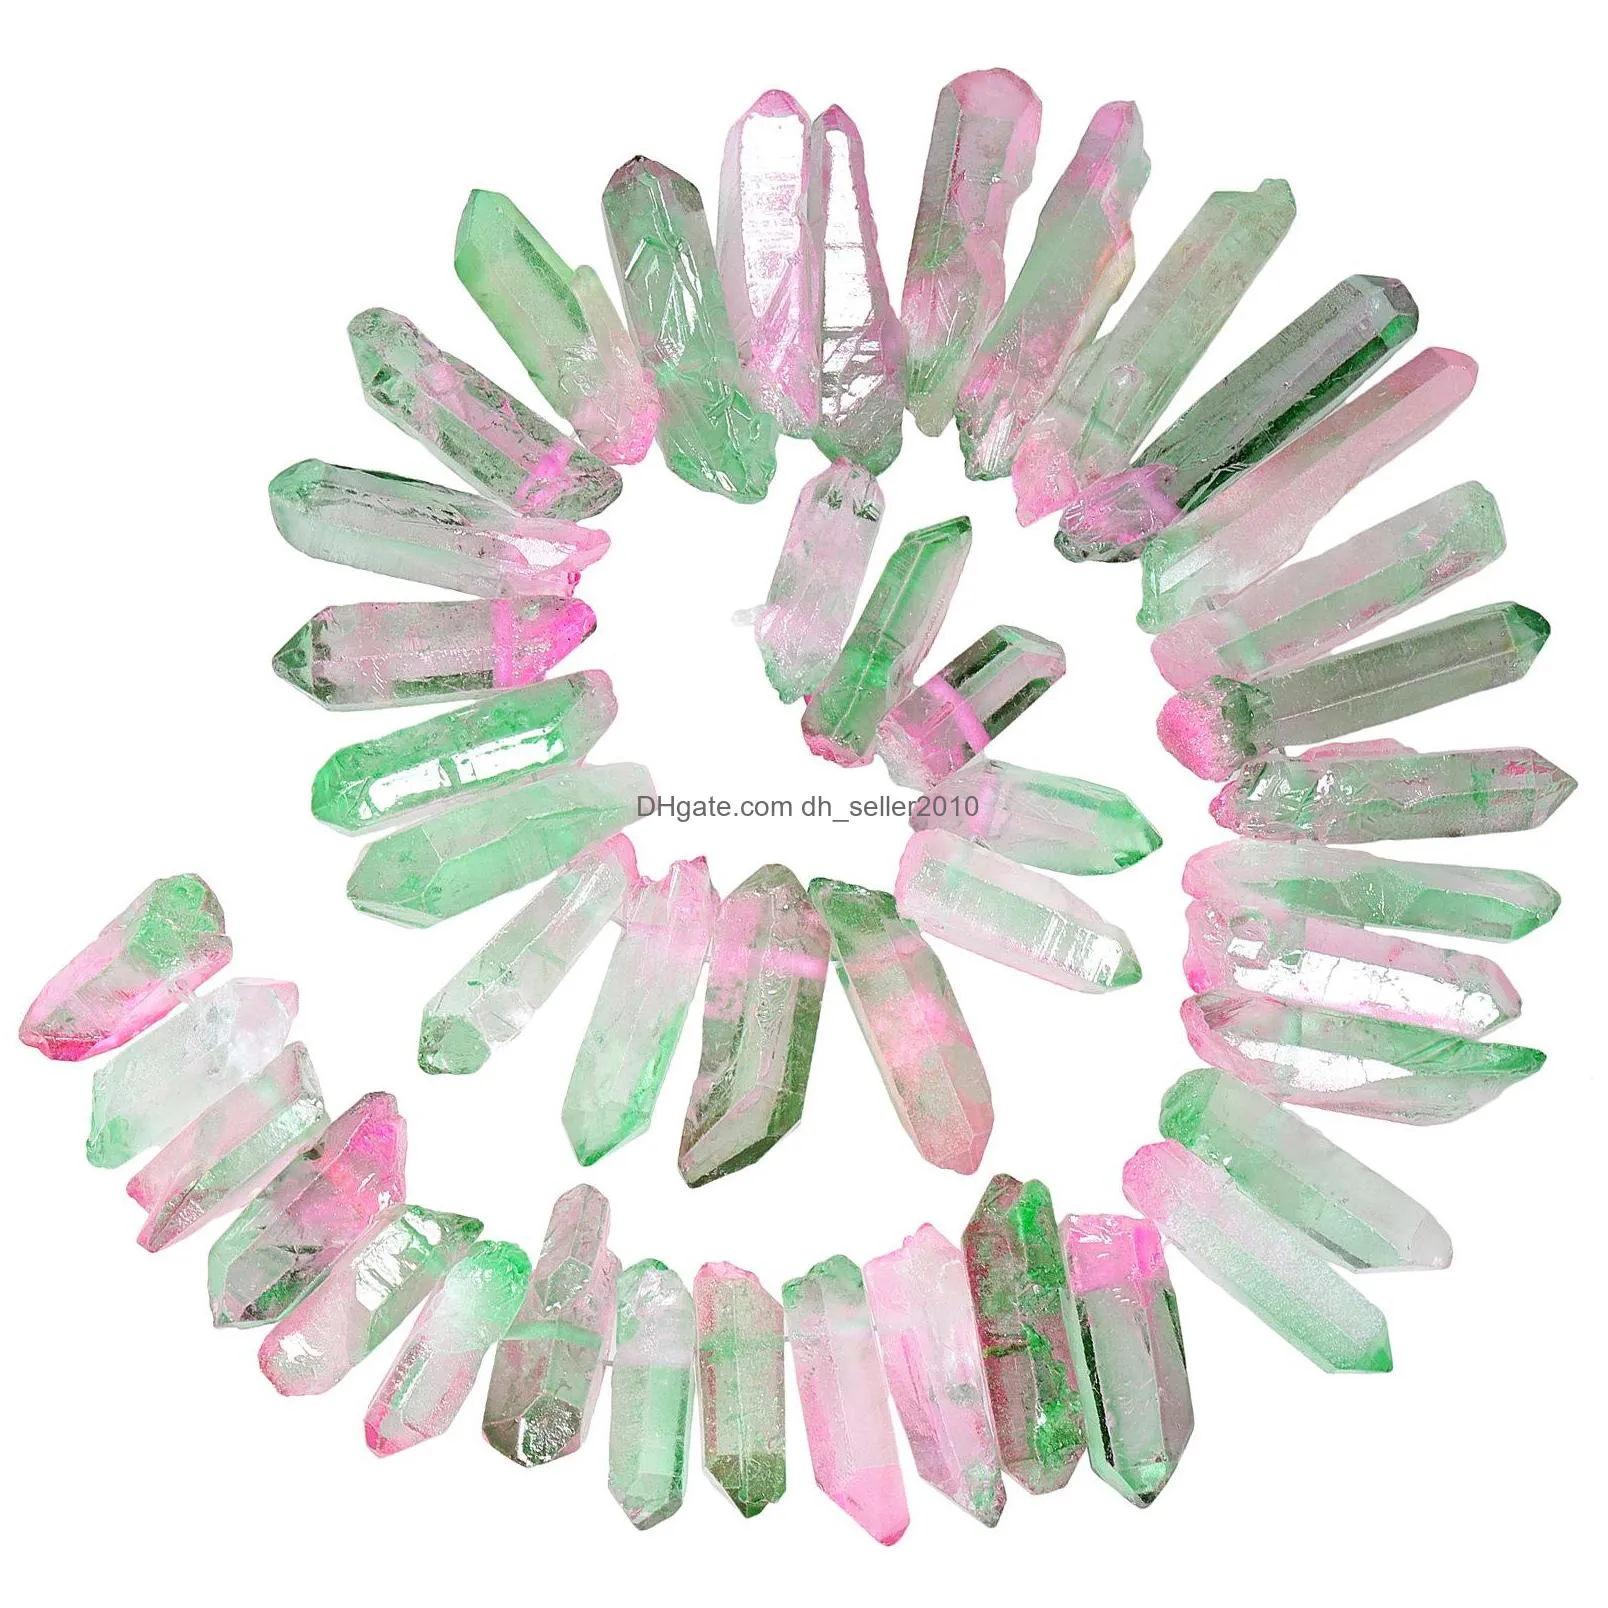 loose rough crystal points beads for crafts jewelry making natural raw rock quartz bulk crushed titanium coated quartz top drilled stone 1